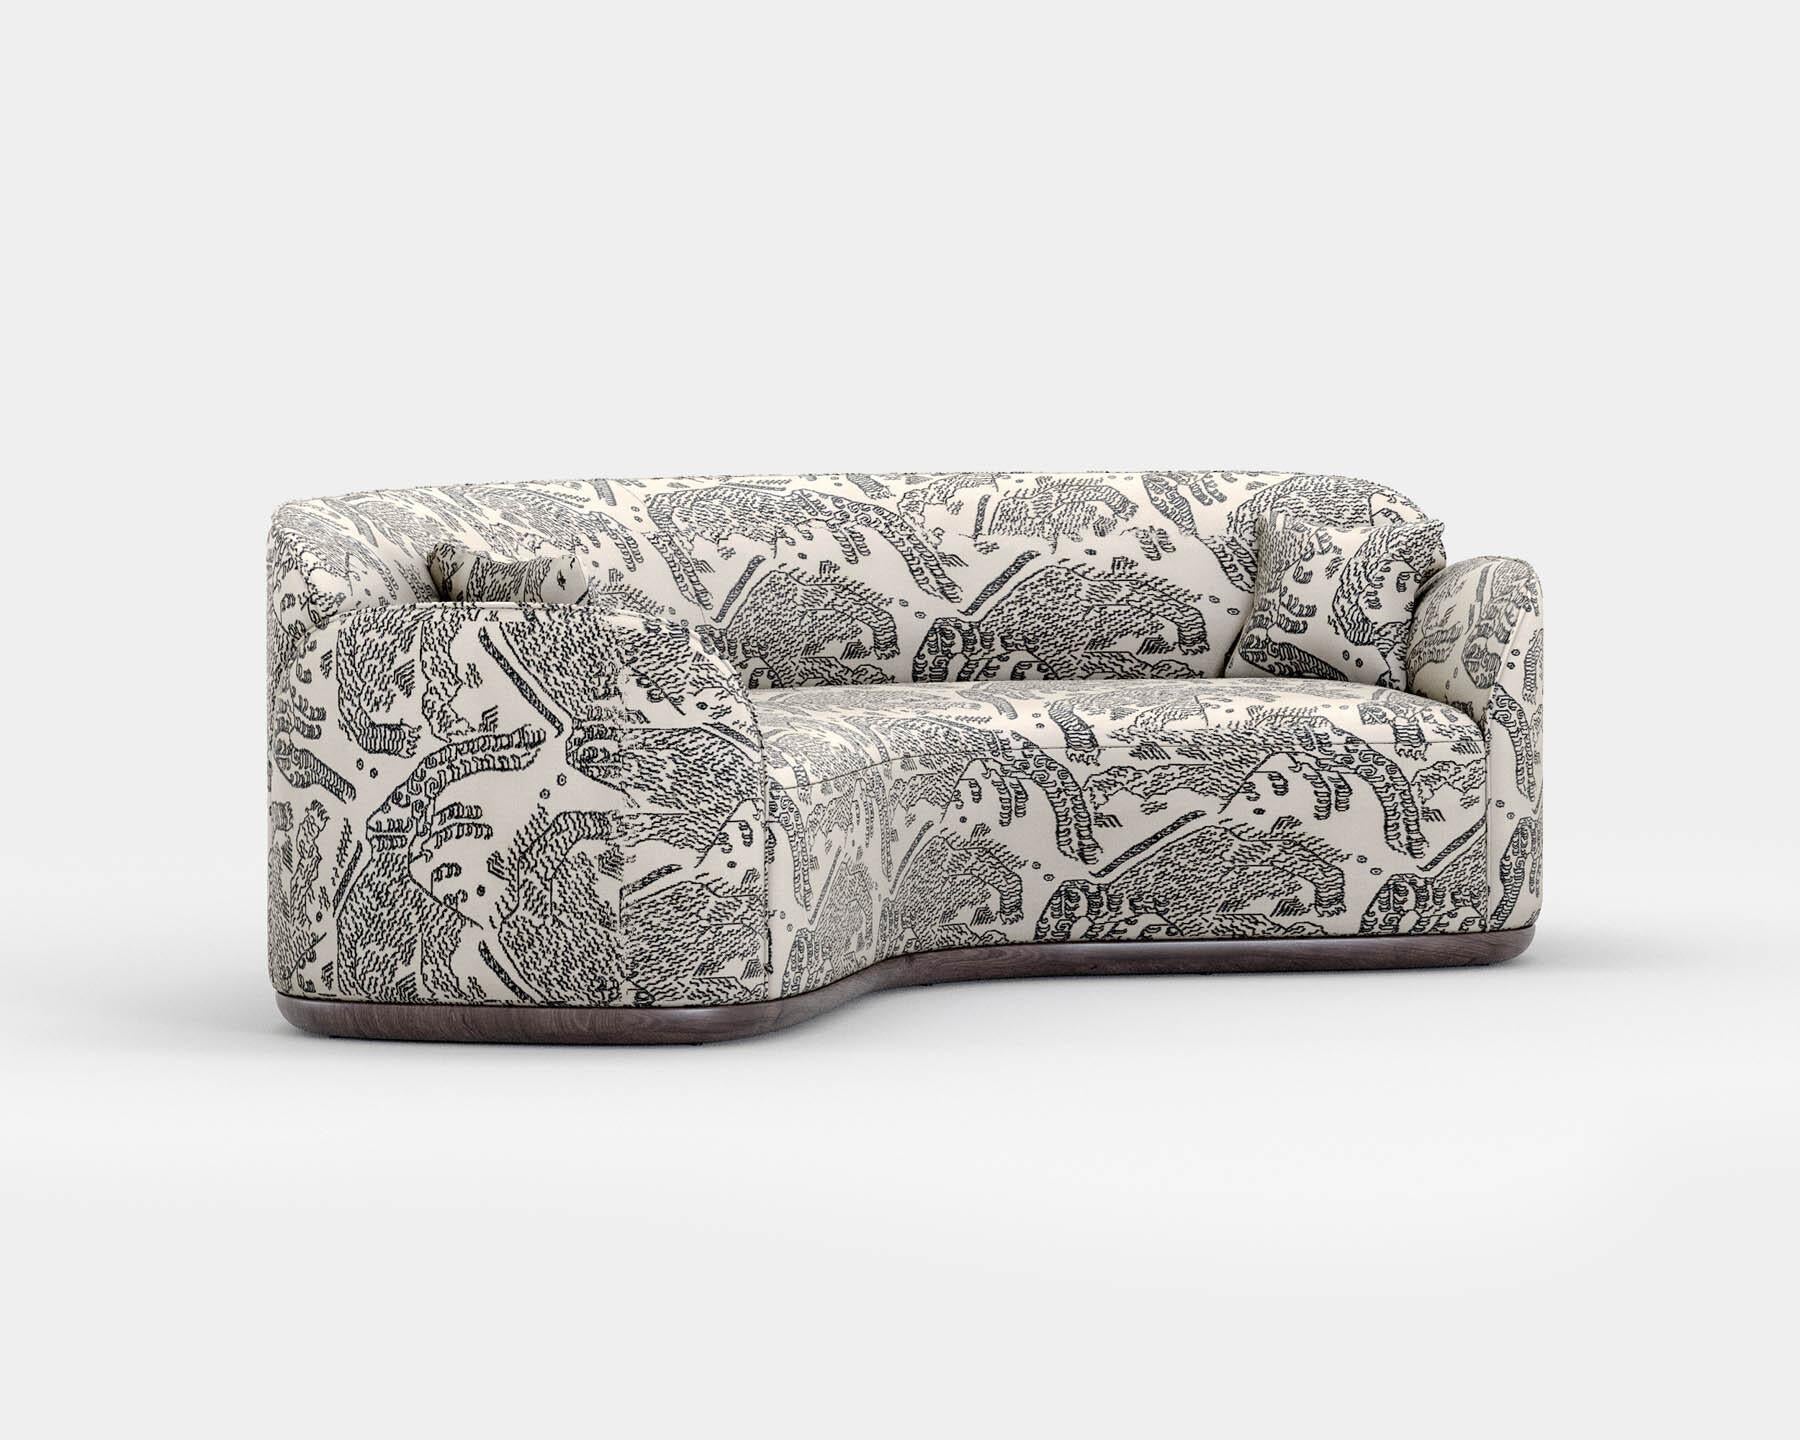 Unio Curved sofa by Poiat 
Designers: Timo Mikkonen & Antti Rouhunkoski 

Collection UNIO 2023

Dimensions: H. 72 x W. 220 D. 110 cm SH. 40 (3 seaters)
Model shown: Tiger Mountain Graphite - Dedar
 
The Unio Collection, featuring an armchair